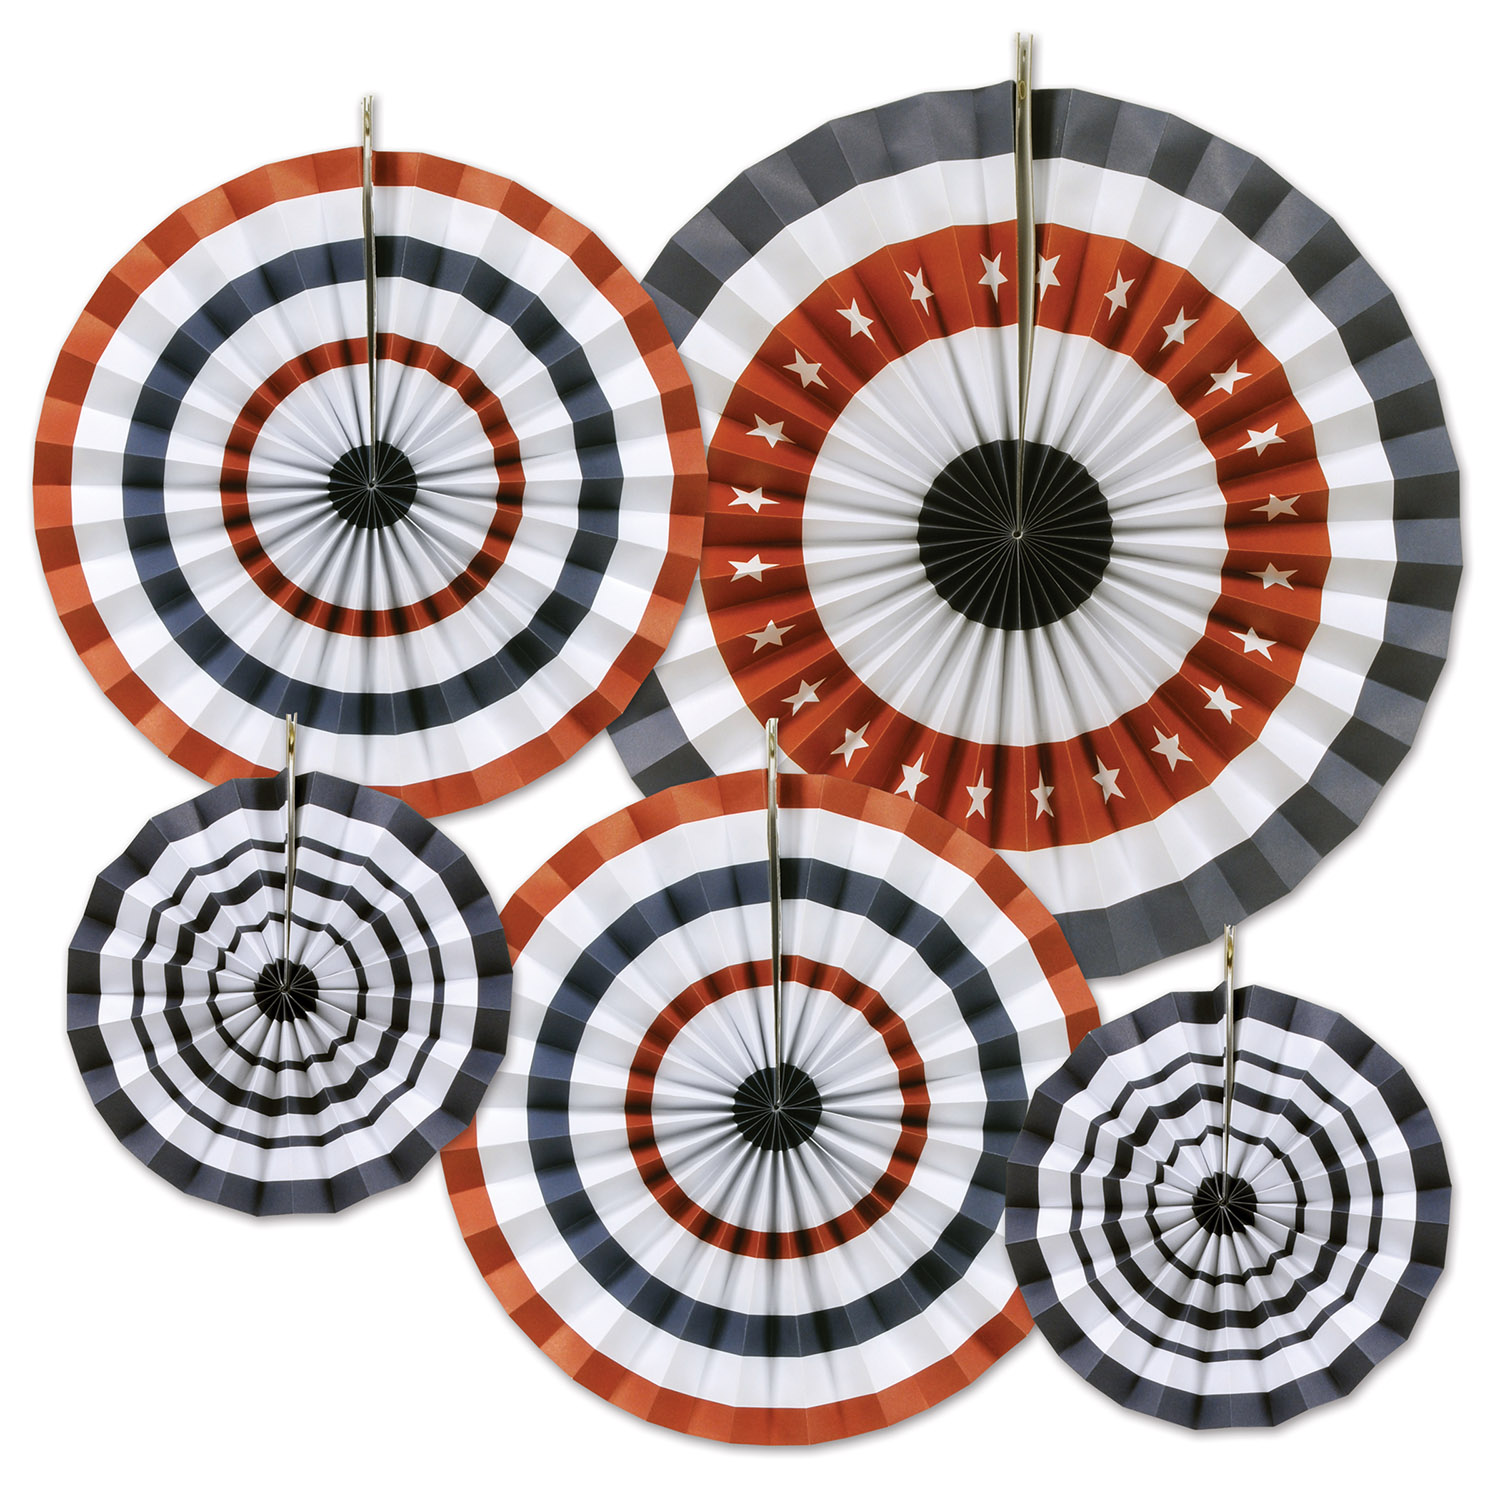 hanging red, white, and blue paper fans in multiple sizes